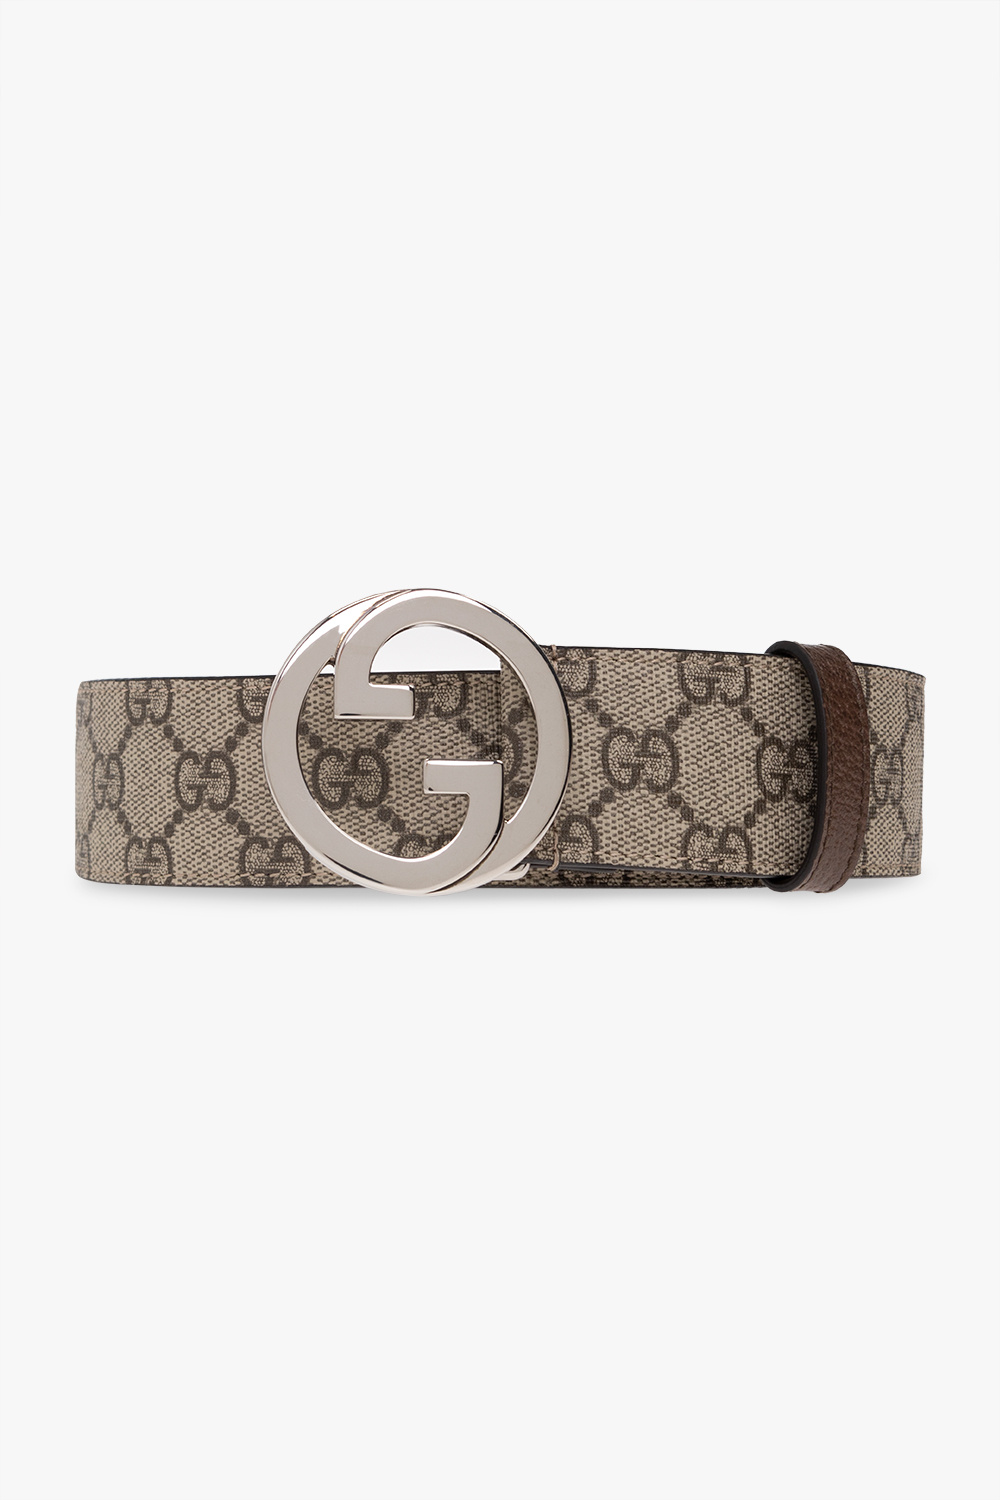 Signature leather belt Louis Vuitton Silver size 39 Inches in